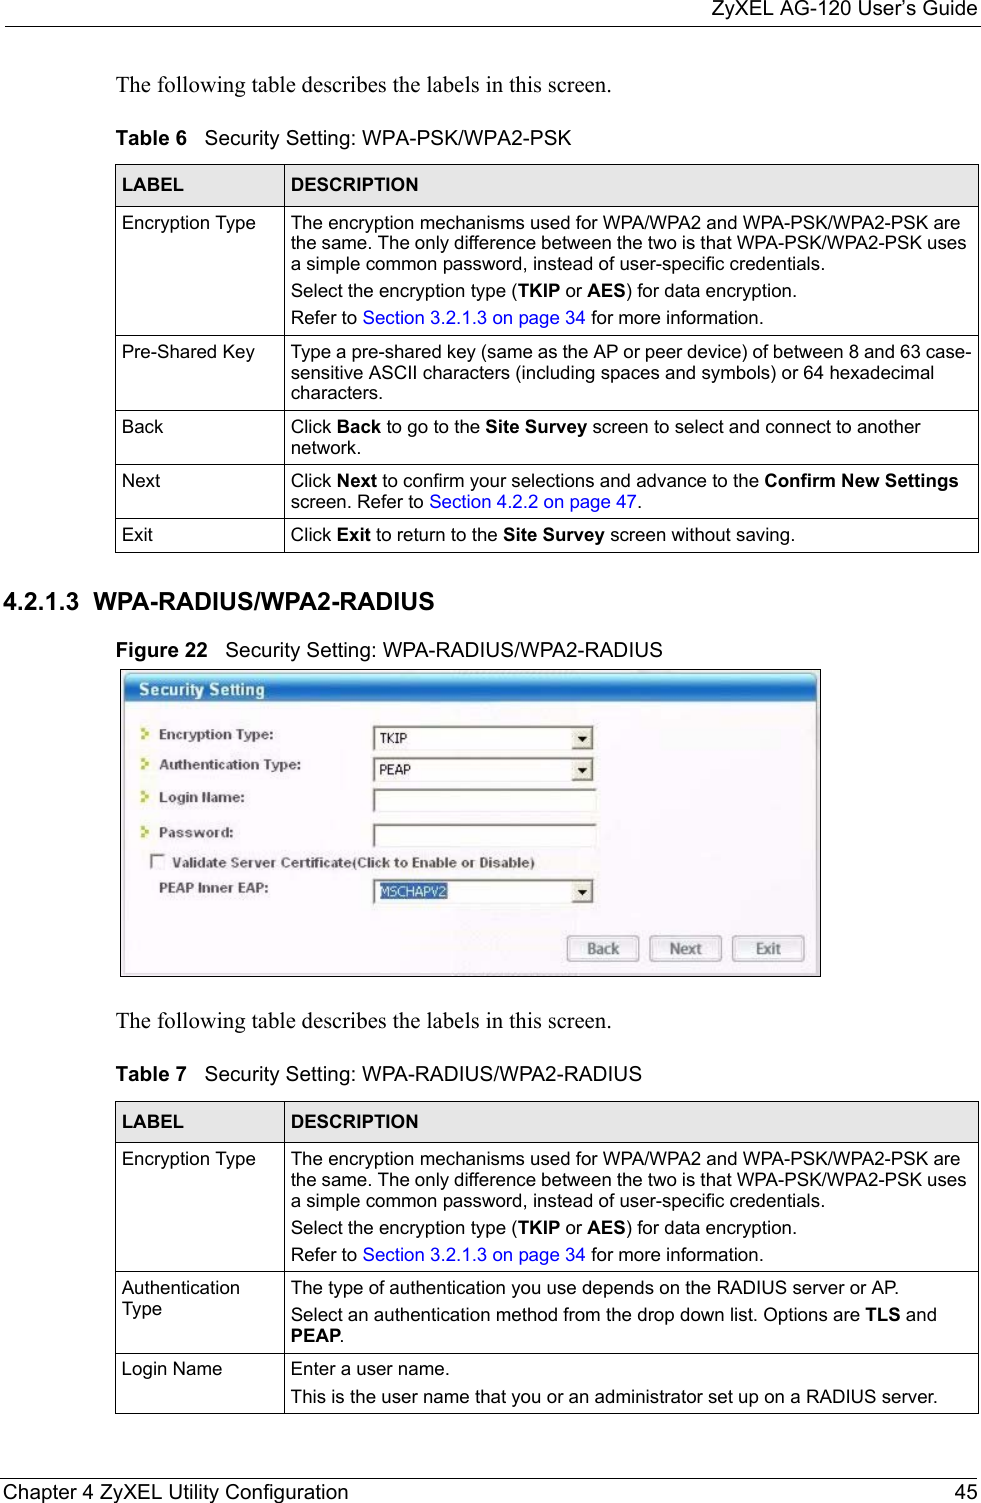 ZyXEL AG-120 User’s GuideChapter 4 ZyXEL Utility Configuration 45The following table describes the labels in this screen. 4.2.1.3  WPA-RADIUS/WPA2-RADIUSFigure 22   Security Setting: WPA-RADIUS/WPA2-RADIUSThe following table describes the labels in this screen. Table 6   Security Setting: WPA-PSK/WPA2-PSKLABEL DESCRIPTIONEncryption Type The encryption mechanisms used for WPA/WPA2 and WPA-PSK/WPA2-PSK are the same. The only difference between the two is that WPA-PSK/WPA2-PSK uses a simple common password, instead of user-specific credentials.Select the encryption type (TKIP or AES) for data encryption.Refer to Section 3.2.1.3 on page 34 for more information.Pre-Shared Key Type a pre-shared key (same as the AP or peer device) of between 8 and 63 case-sensitive ASCII characters (including spaces and symbols) or 64 hexadecimal characters.Back Click Back to go to the Site Survey screen to select and connect to another network.Next Click Next to confirm your selections and advance to the Confirm New Settings screen. Refer to Section 4.2.2 on page 47. Exit Click Exit to return to the Site Survey screen without saving.Table 7   Security Setting: WPA-RADIUS/WPA2-RADIUSLABEL DESCRIPTIONEncryption Type The encryption mechanisms used for WPA/WPA2 and WPA-PSK/WPA2-PSK are the same. The only difference between the two is that WPA-PSK/WPA2-PSK uses a simple common password, instead of user-specific credentials.Select the encryption type (TKIP or AES) for data encryption.Refer to Section 3.2.1.3 on page 34 for more information.Authentication TypeThe type of authentication you use depends on the RADIUS server or AP.Select an authentication method from the drop down list. Options are TLS and PEAP.Login Name Enter a user name. This is the user name that you or an administrator set up on a RADIUS server.